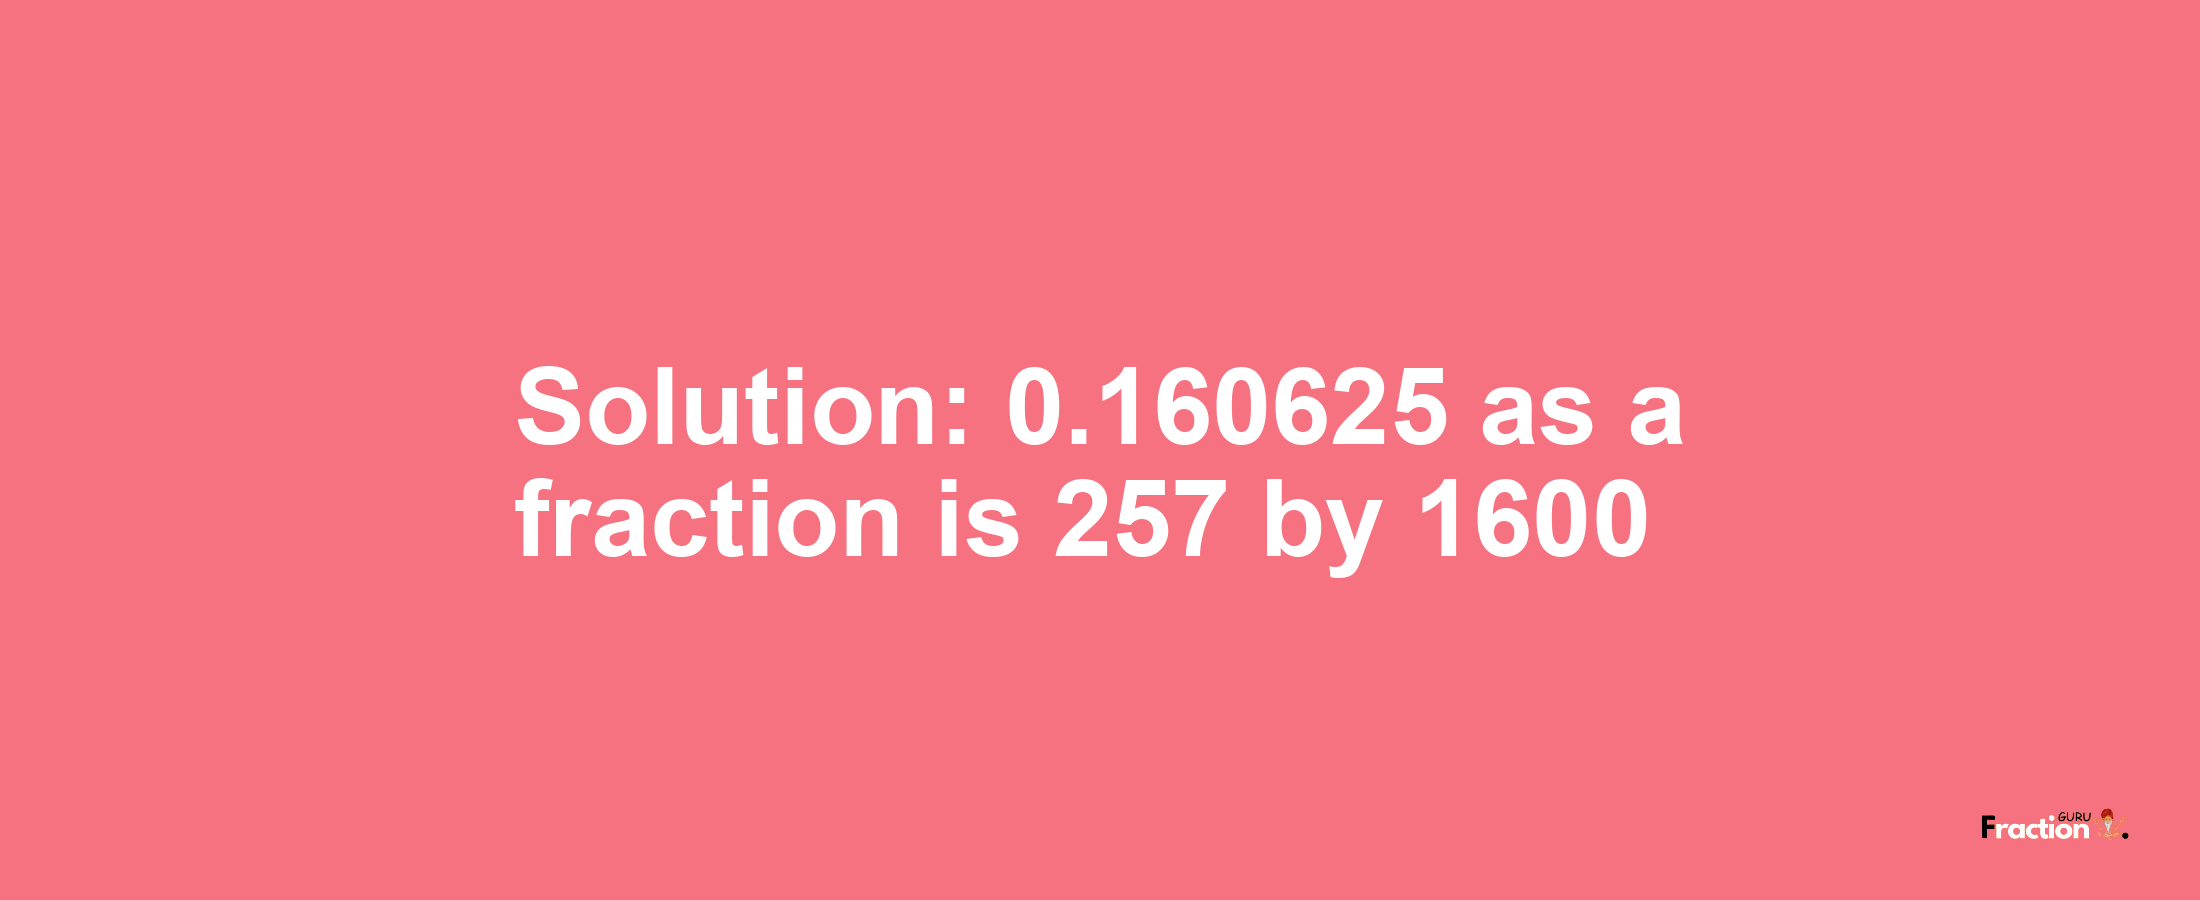 Solution:0.160625 as a fraction is 257/1600